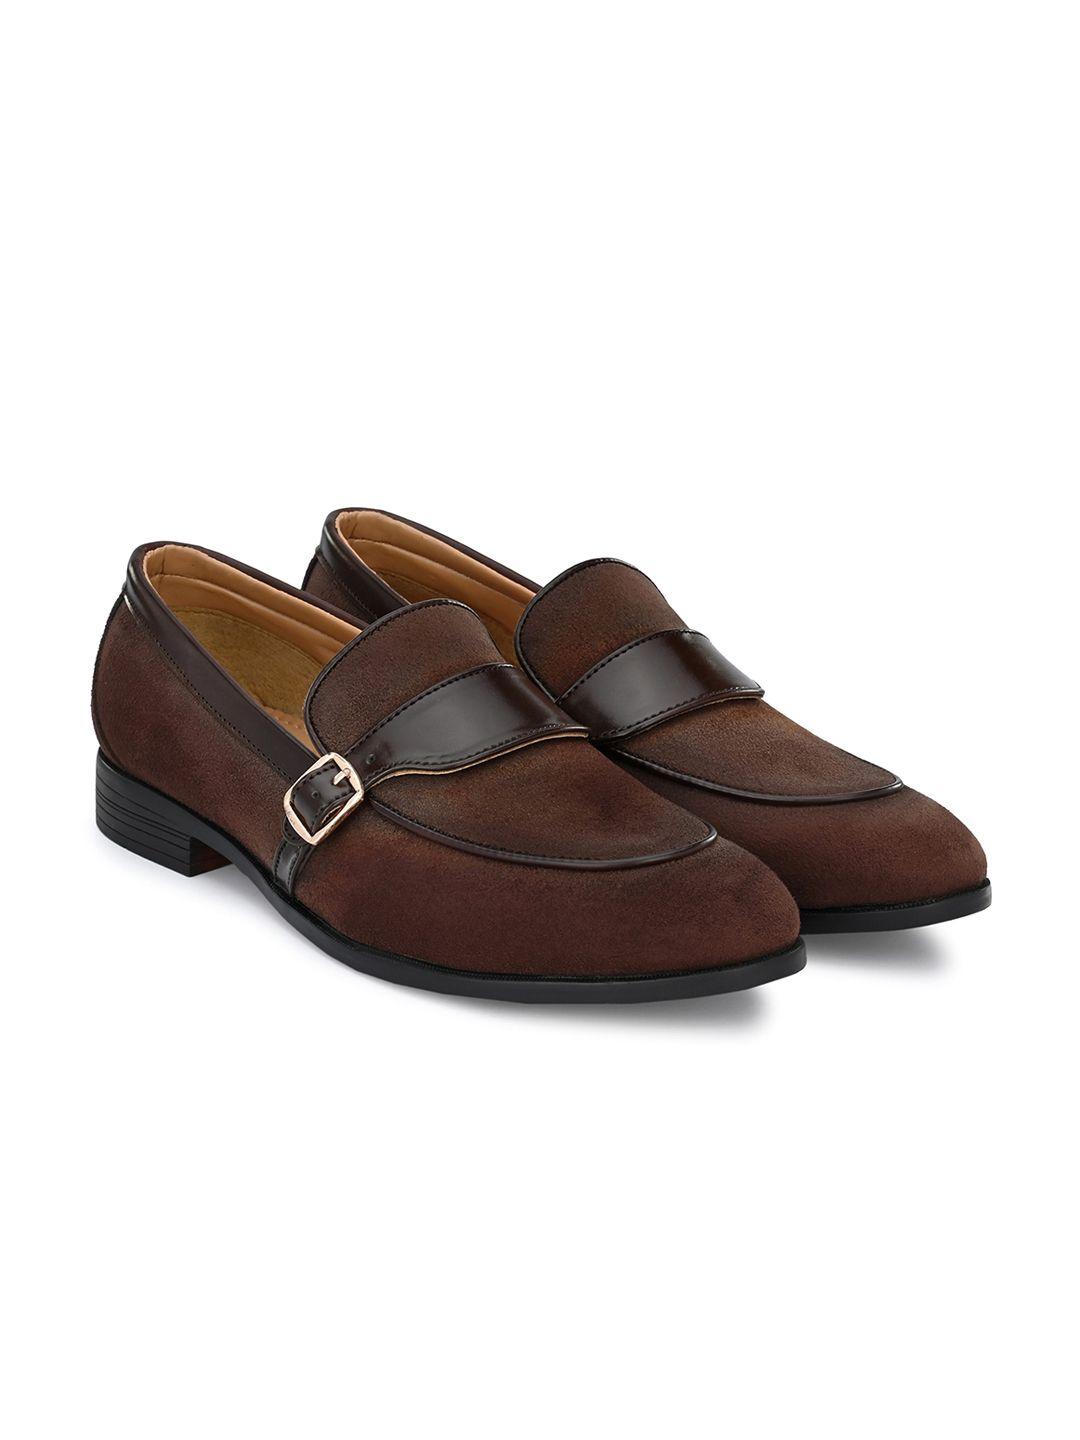 el-paso-men-brown-solid-formal-leather-loafers